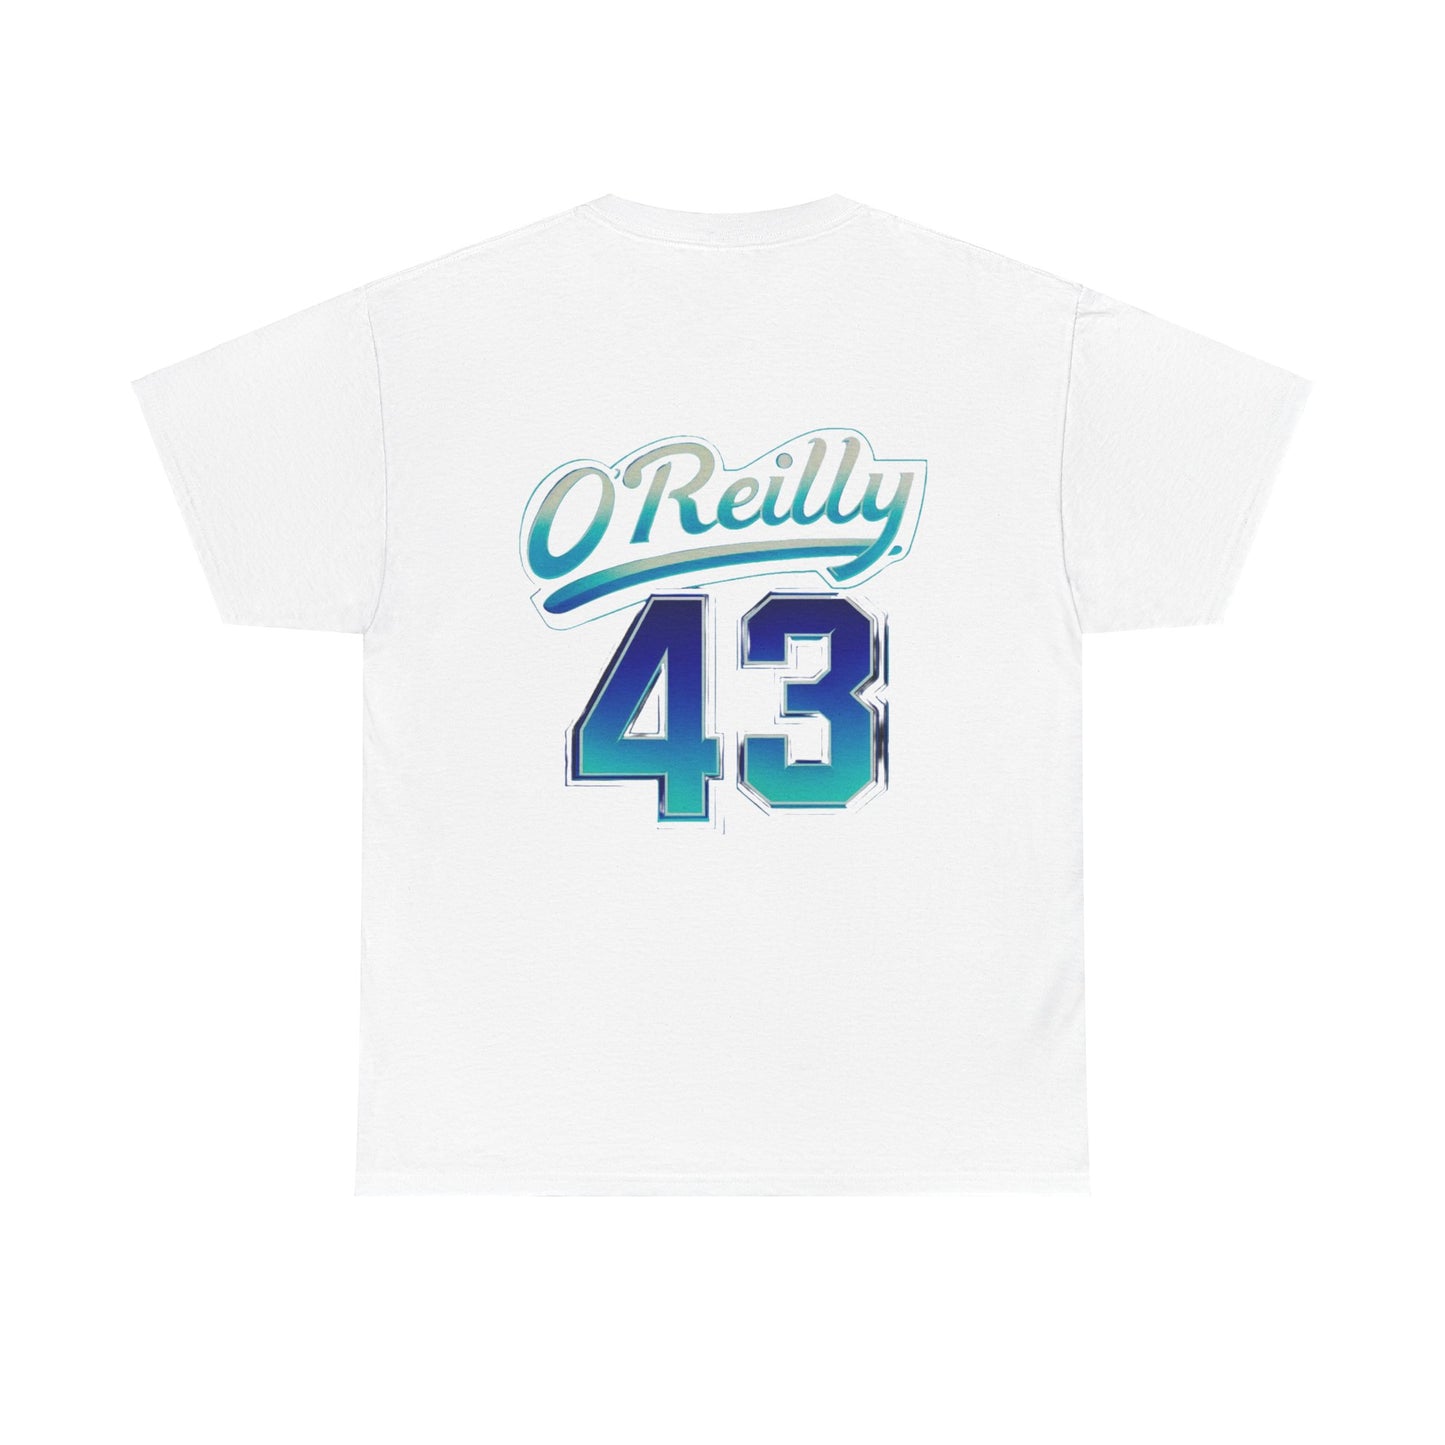 Don O'Reilly Logo - Double Sided Printed Tee